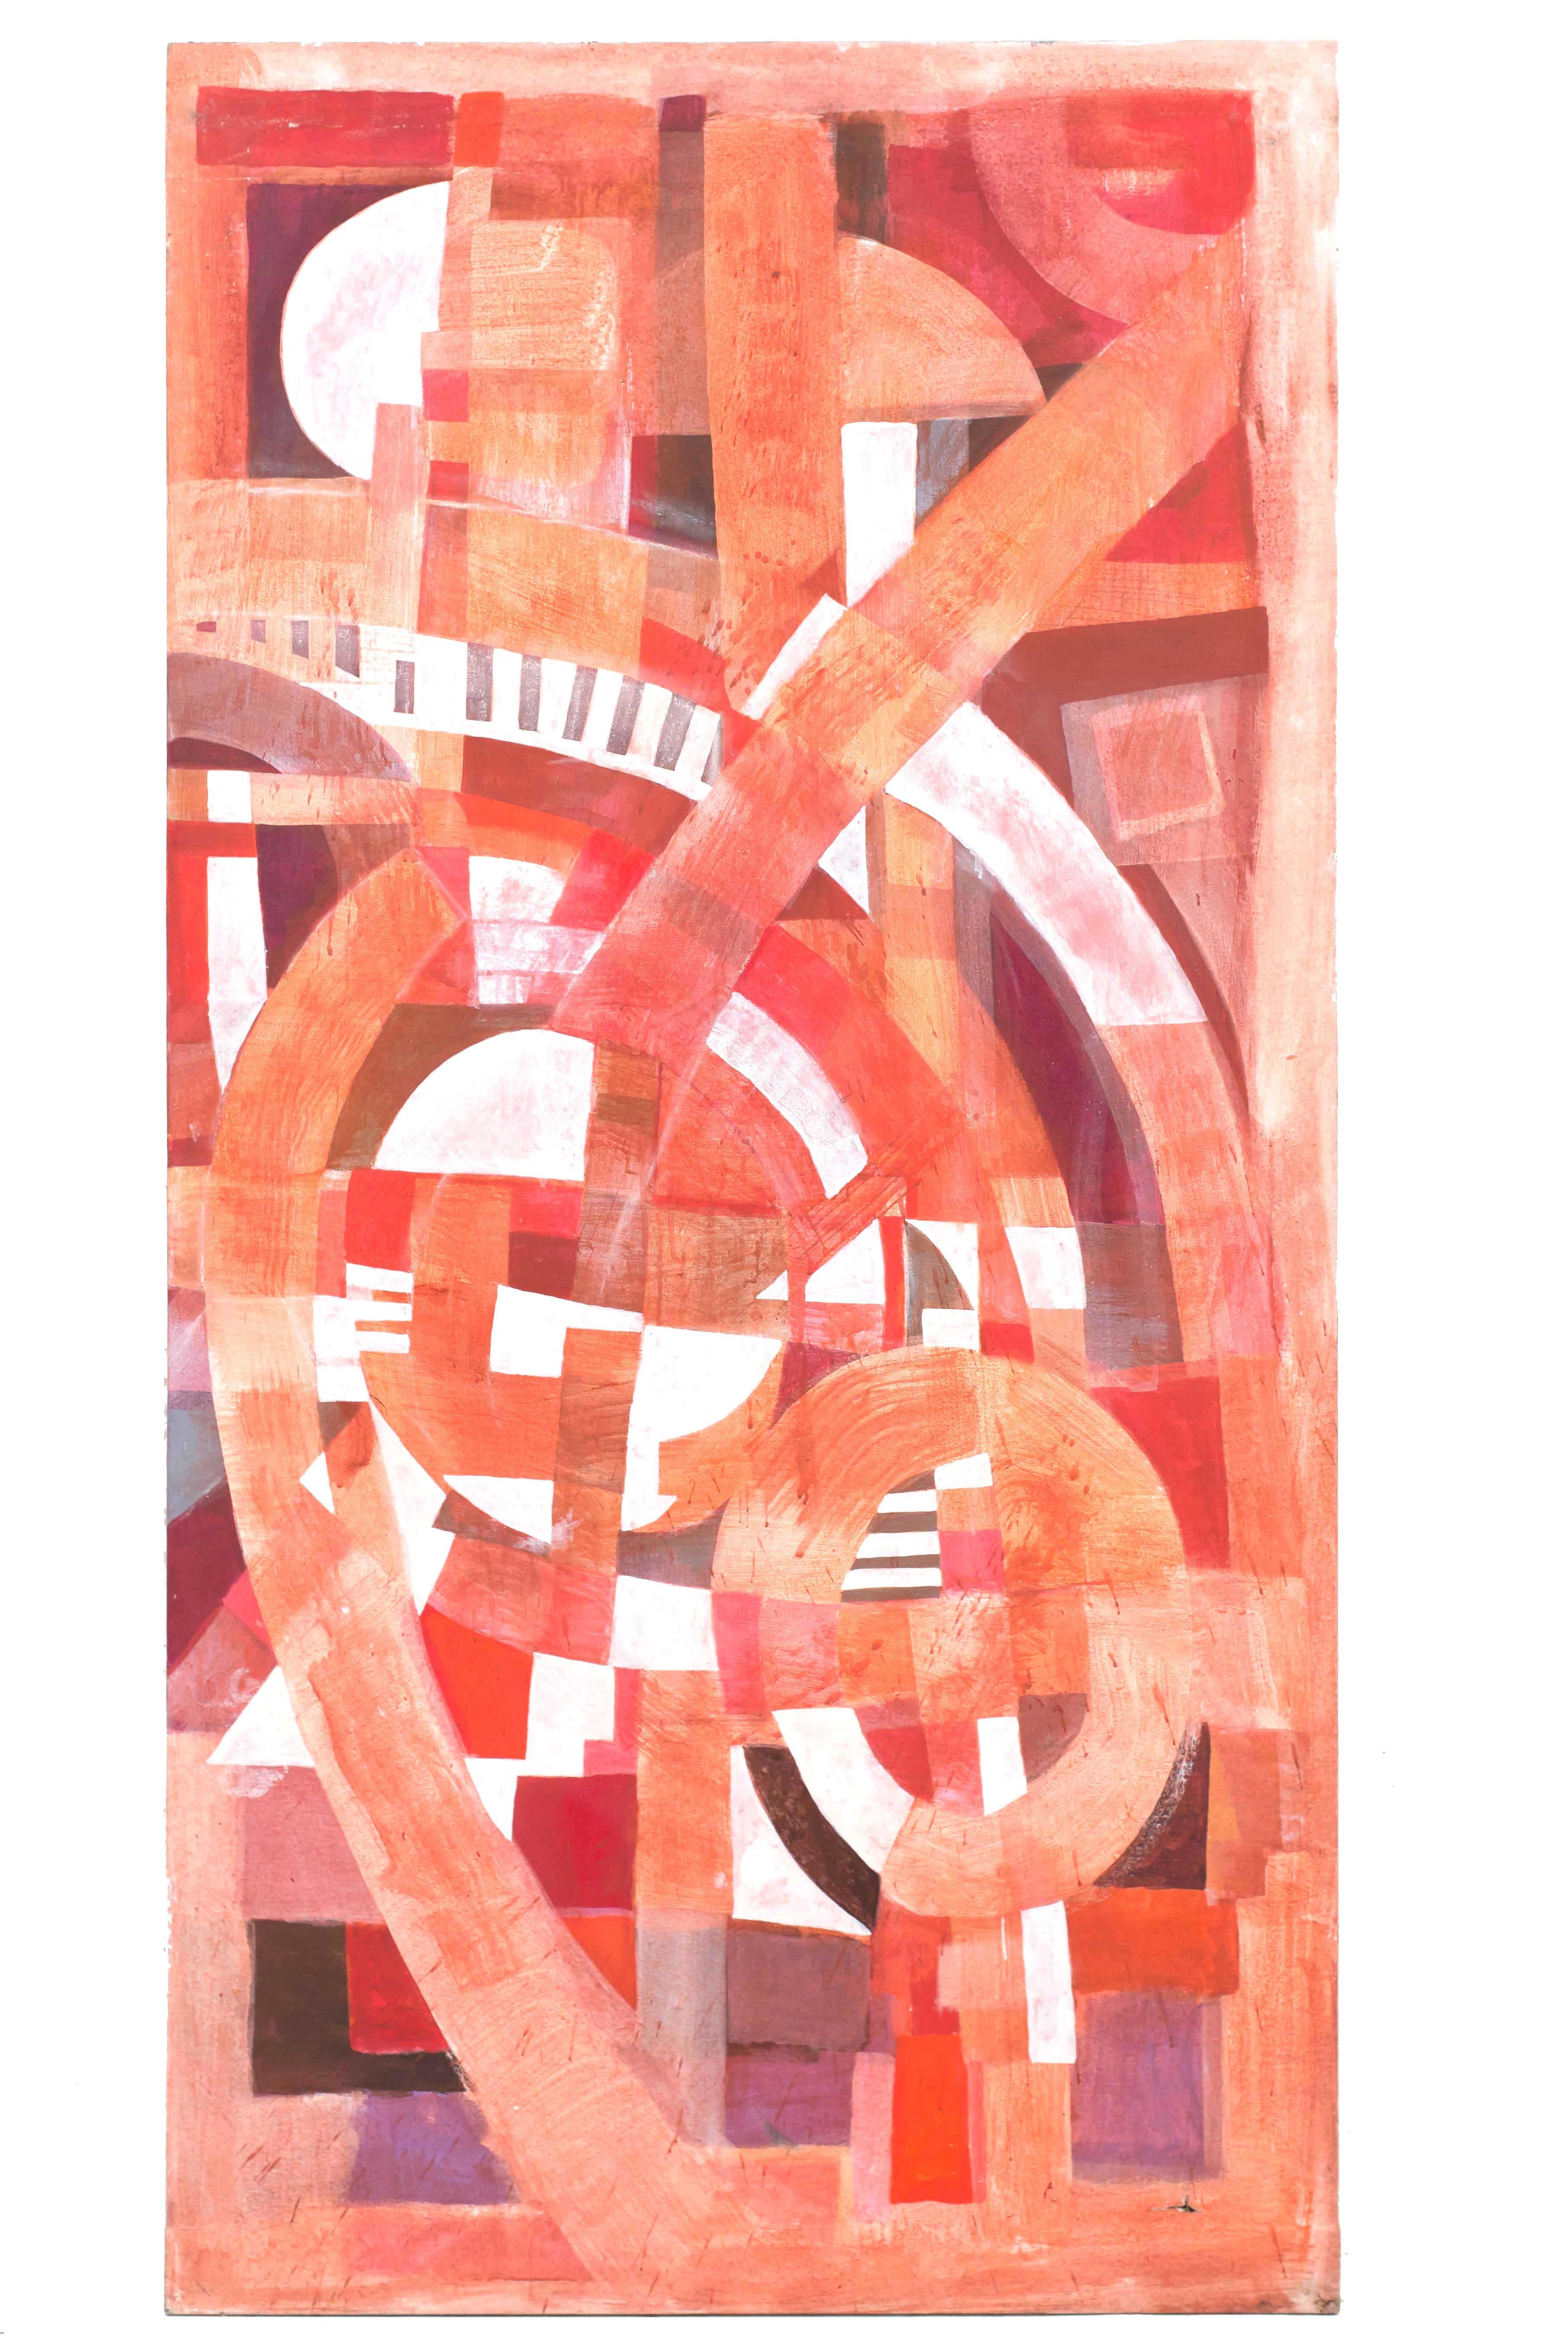 Set of 3 Contemporary abstract paintings (triptych) with gouache on rectangular canvas in shades of pink, red and white. (TOM JOHN, 2010)
